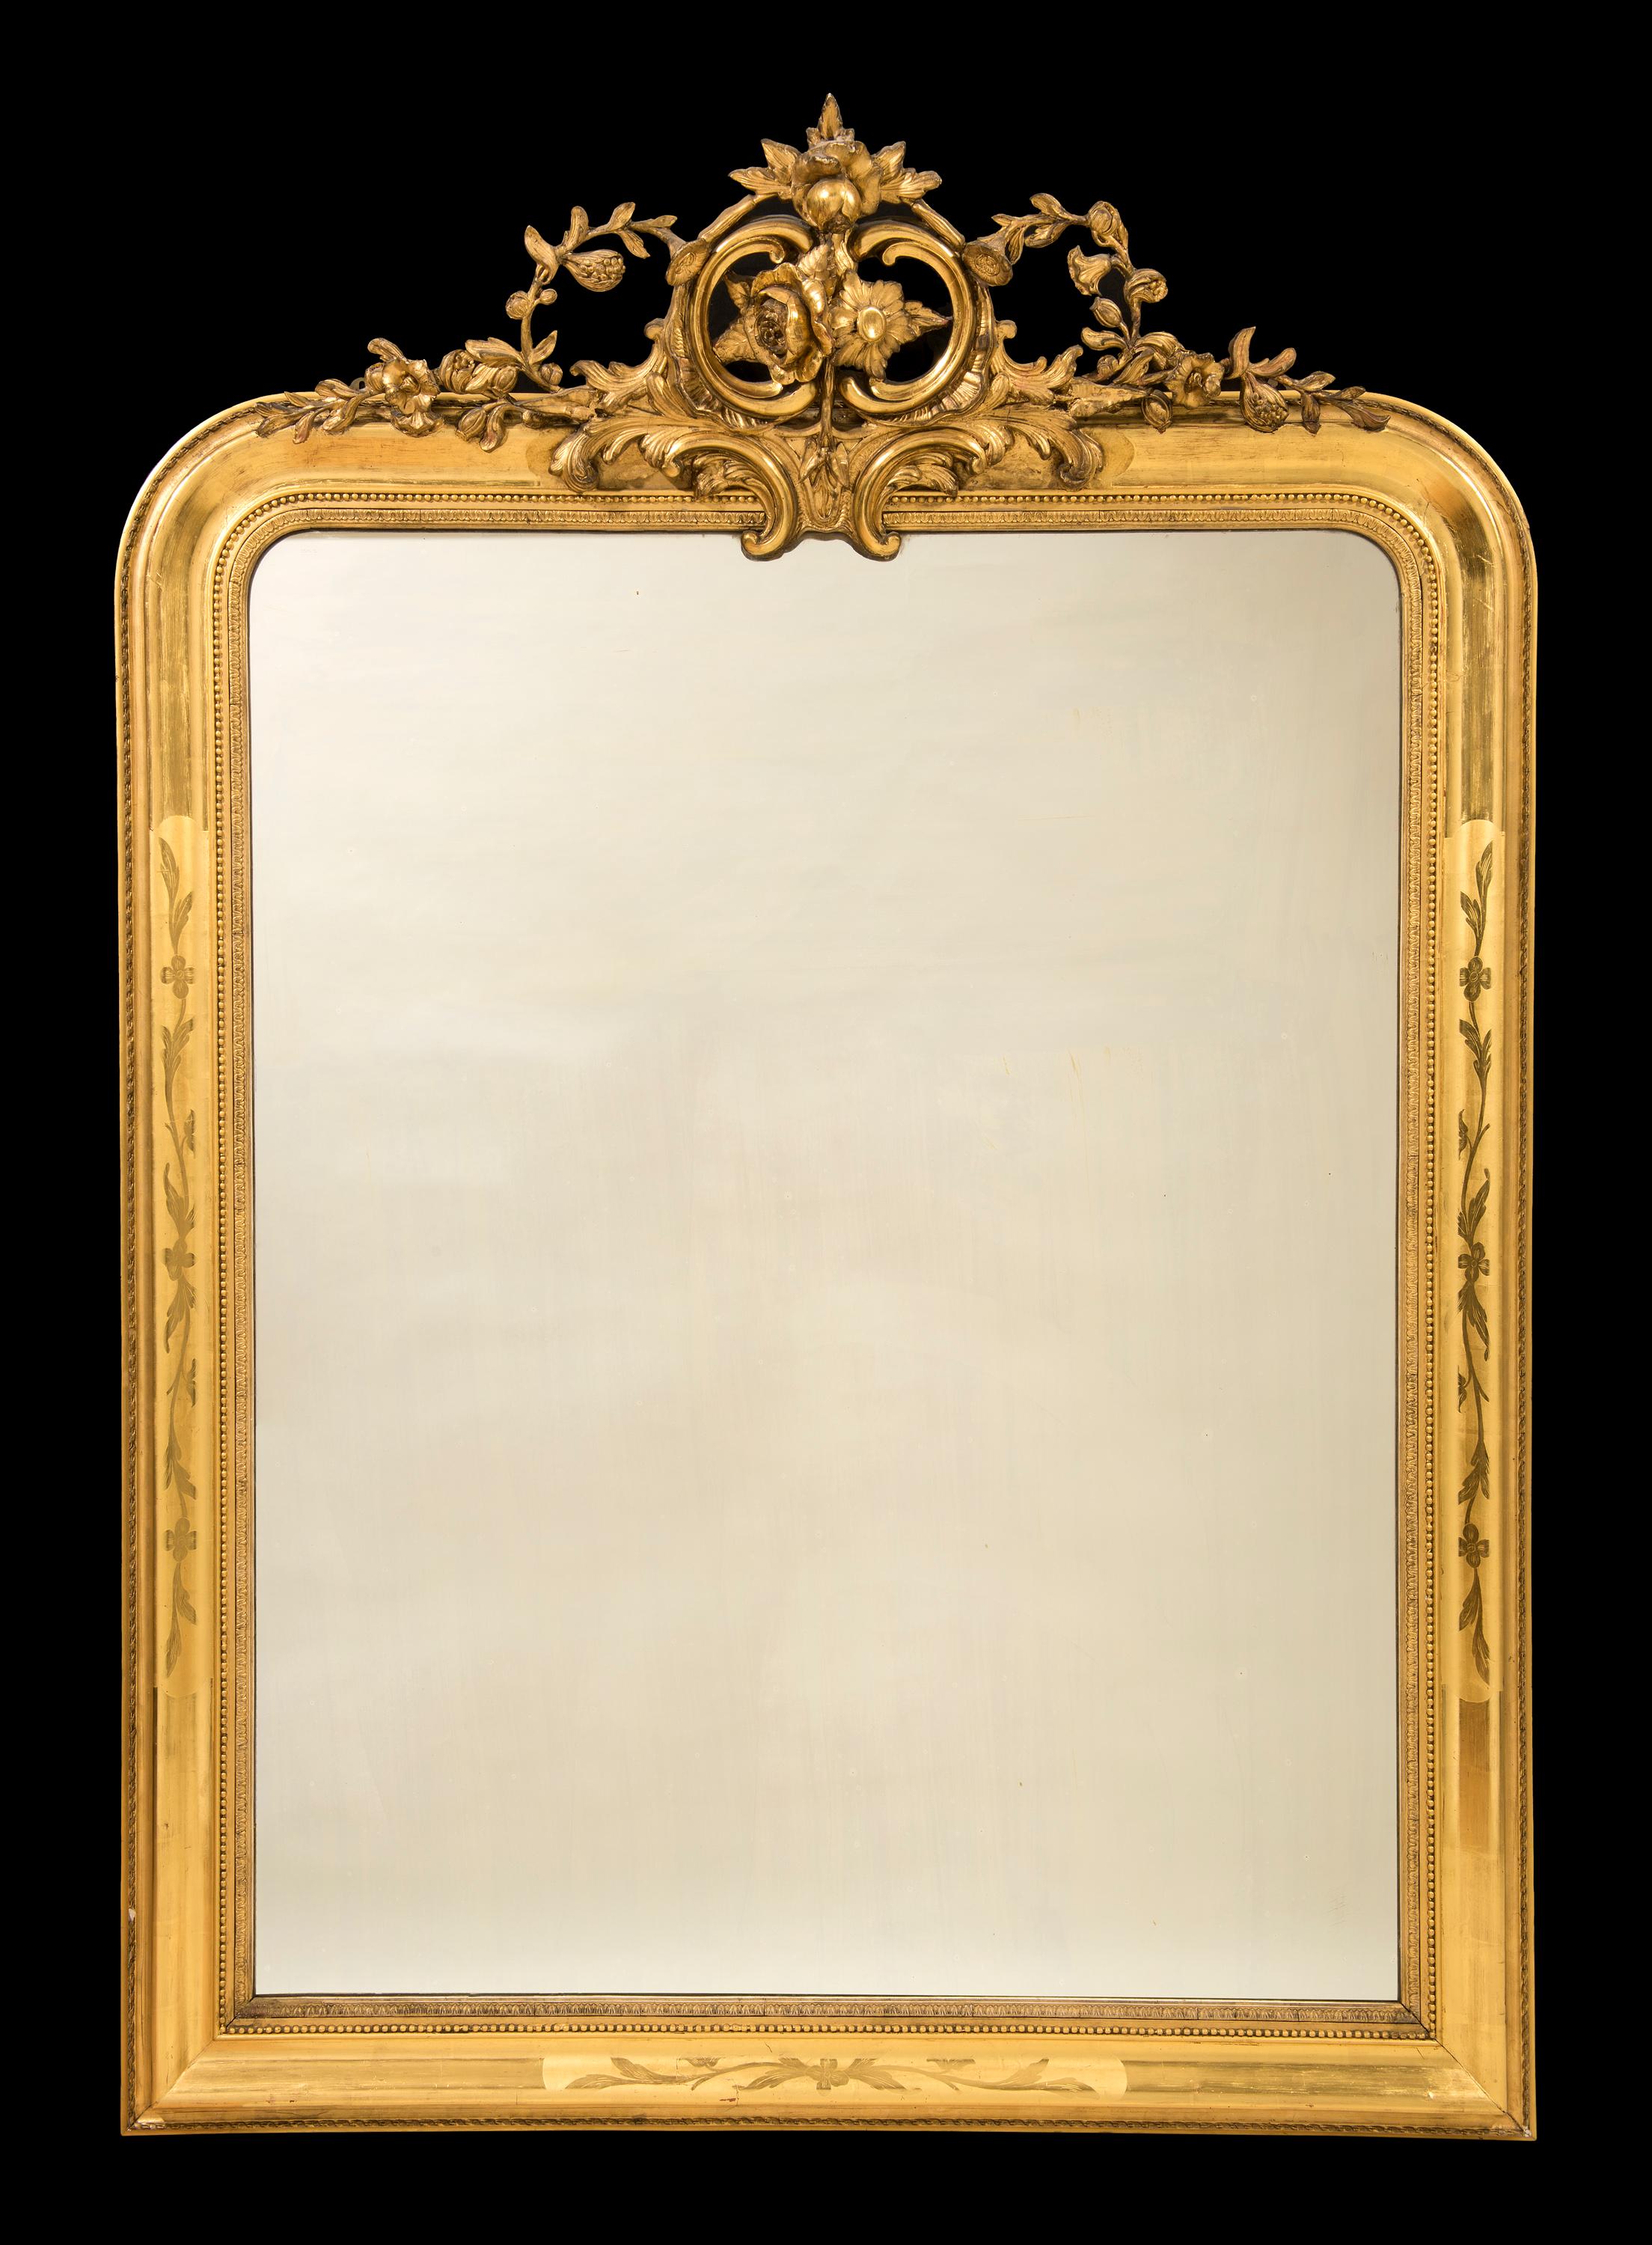 The large French wall mirror with crisply carved flowers and 'C' scrolls and etched flower decoration to the bevelled frame is surmounted around the original plate glass mirror.

Provenance
The Steve & Peg Hale collection.